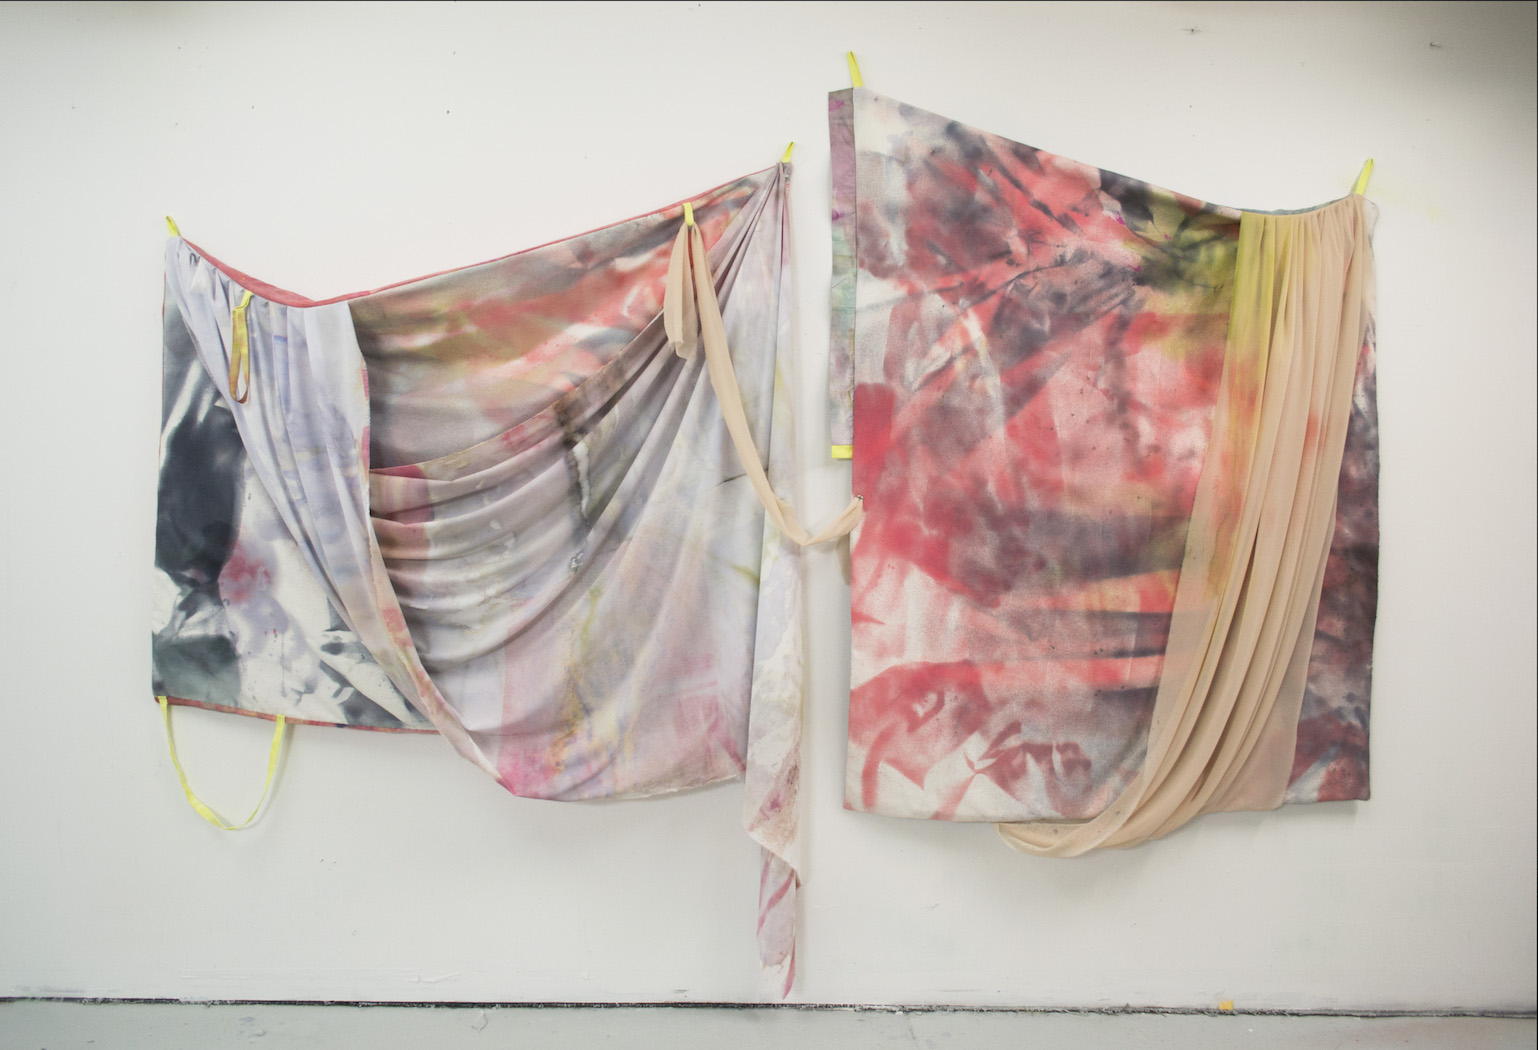 Two panels of fabric connected by sheer draped fabric. Left panel is predominantly grey and white with some pink. Right panel is more pink and peach with some yellow.